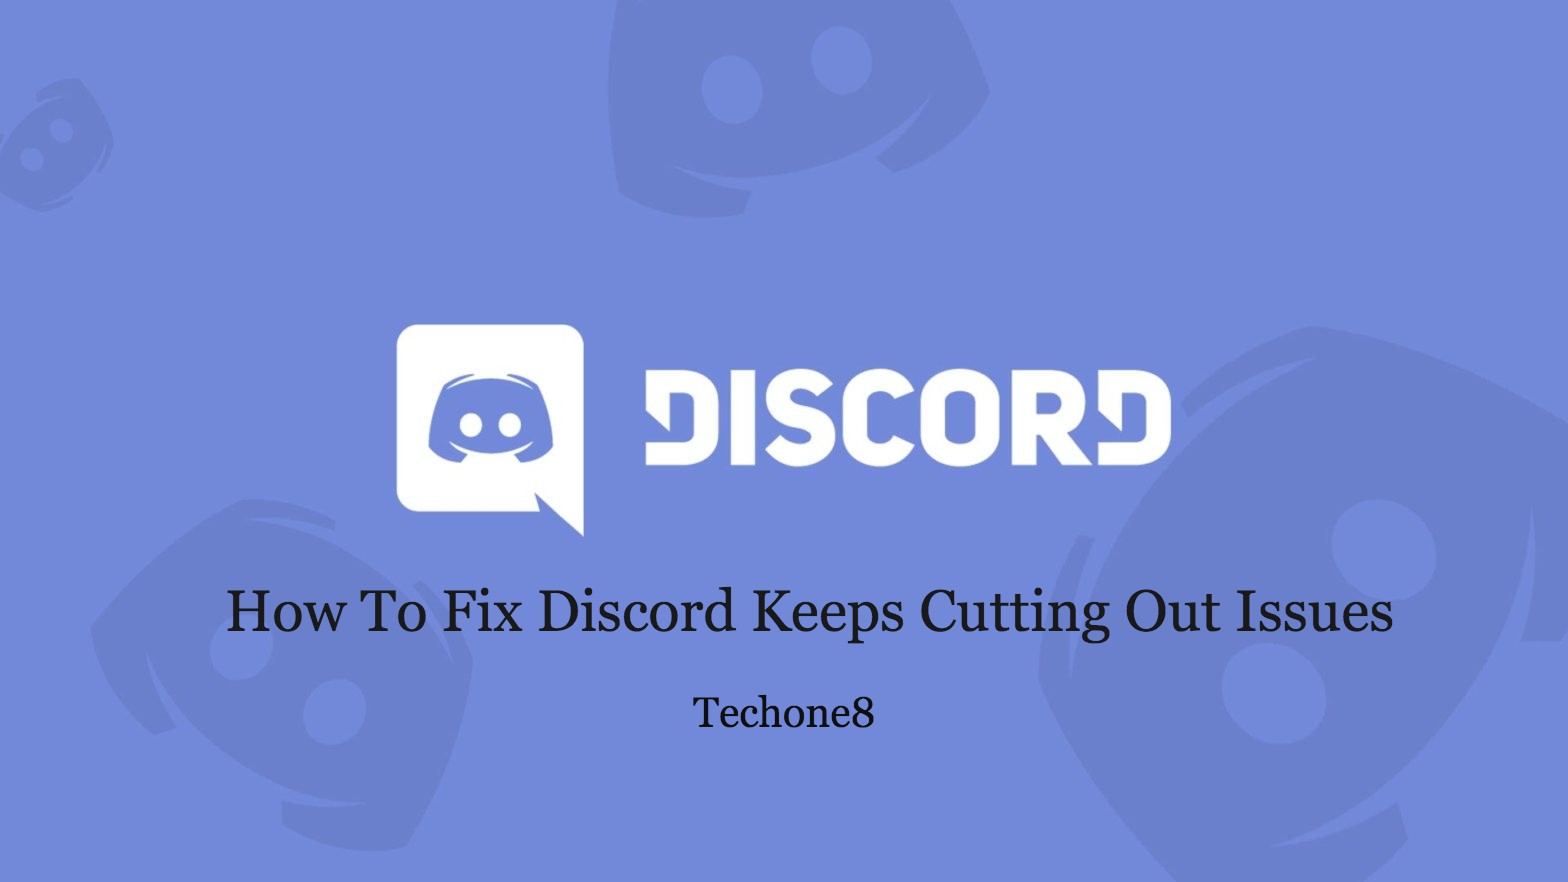 How To Fix Discord Keeps Cutting Out Issues- 5 Easy Steps